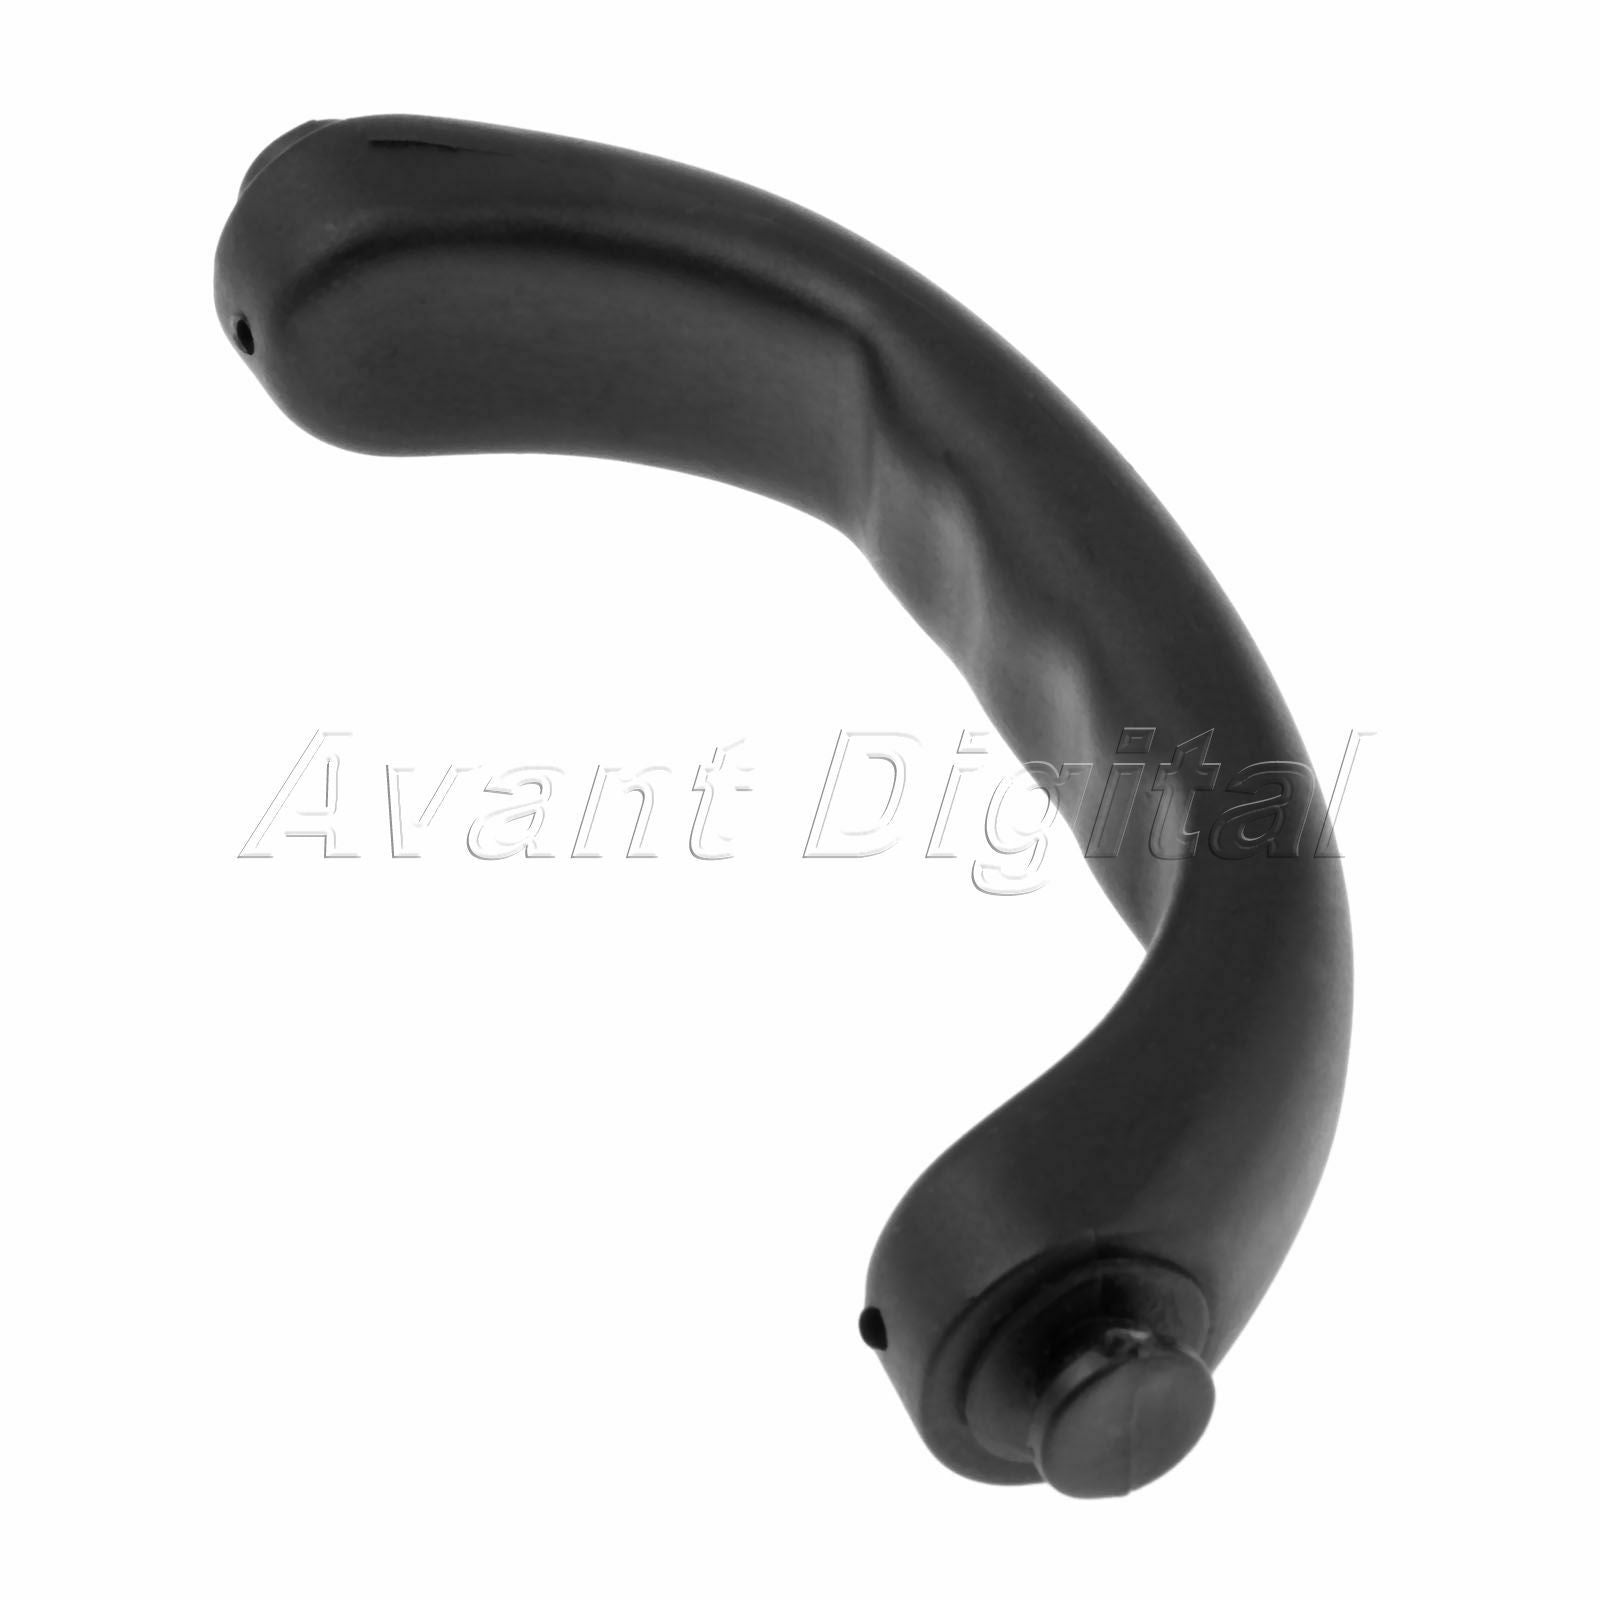 Plastic Black Travelling Suitcase Luggage Case Handle Pull Grip Replacement 1pc